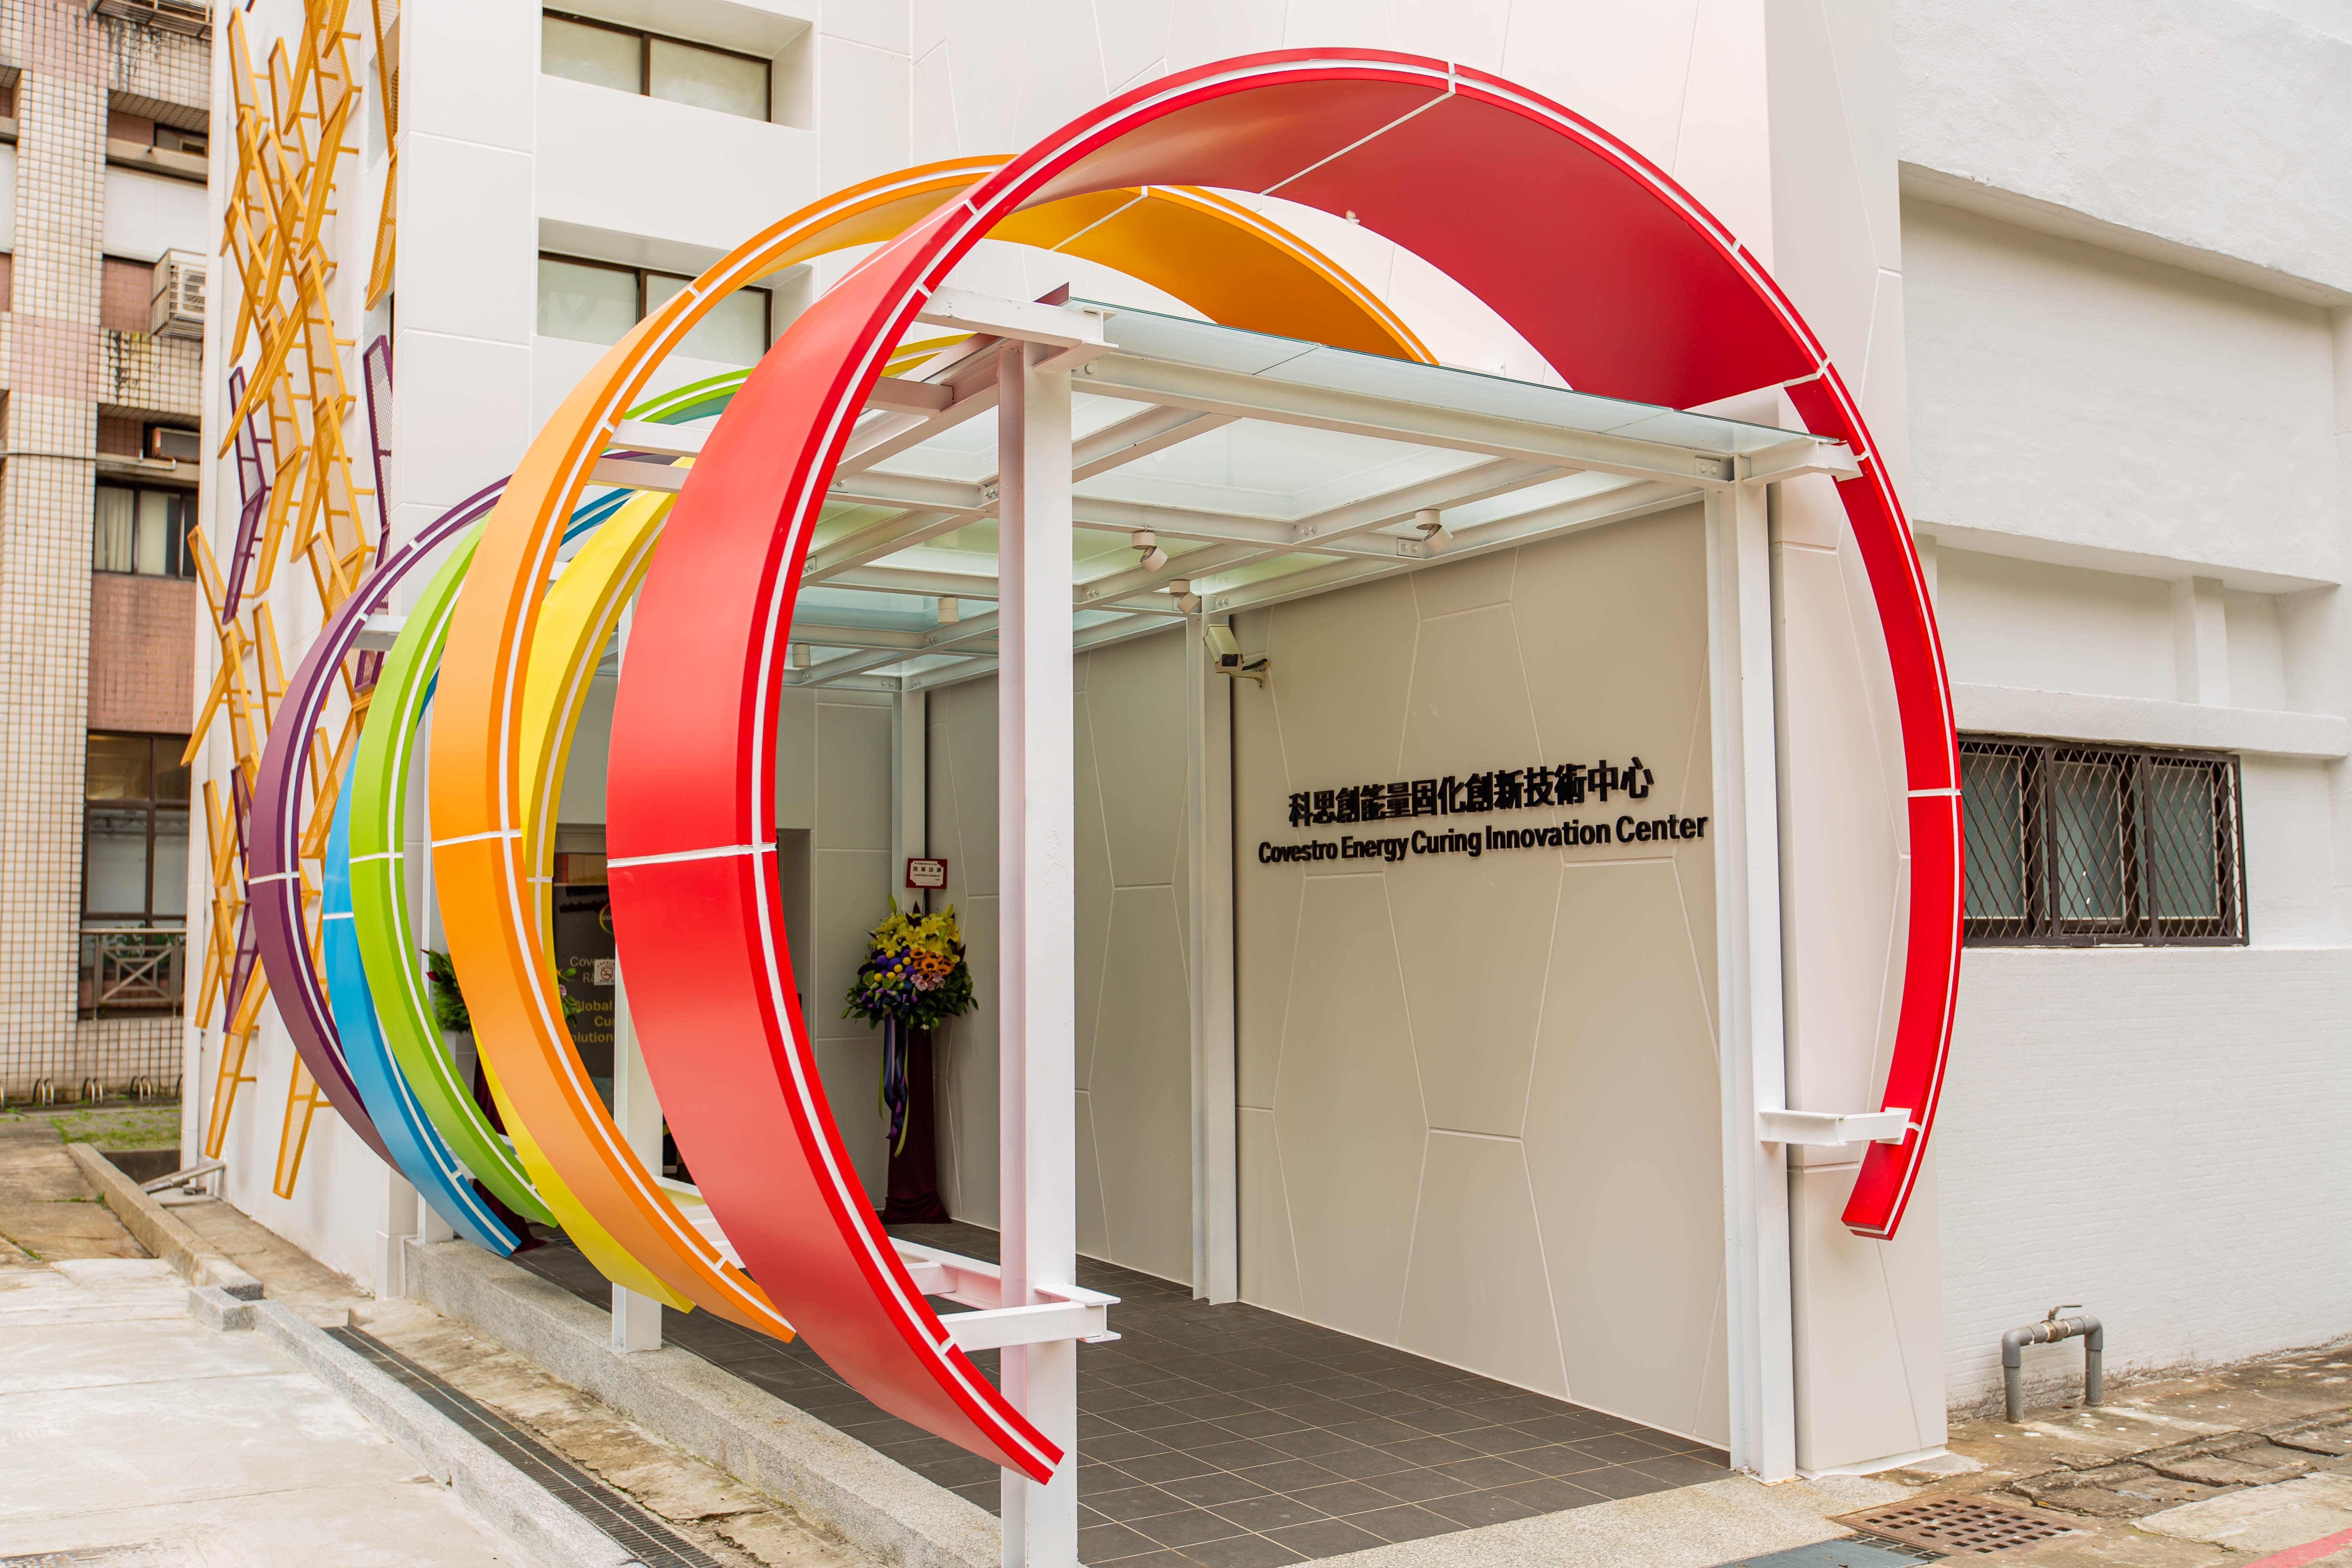 Taking up 1322 square meters, the Covestro Global Energy Curing Innovation Center is one of Covestro’s most important R&D centers around the globe. Photo by Kuo Shih-Sheng